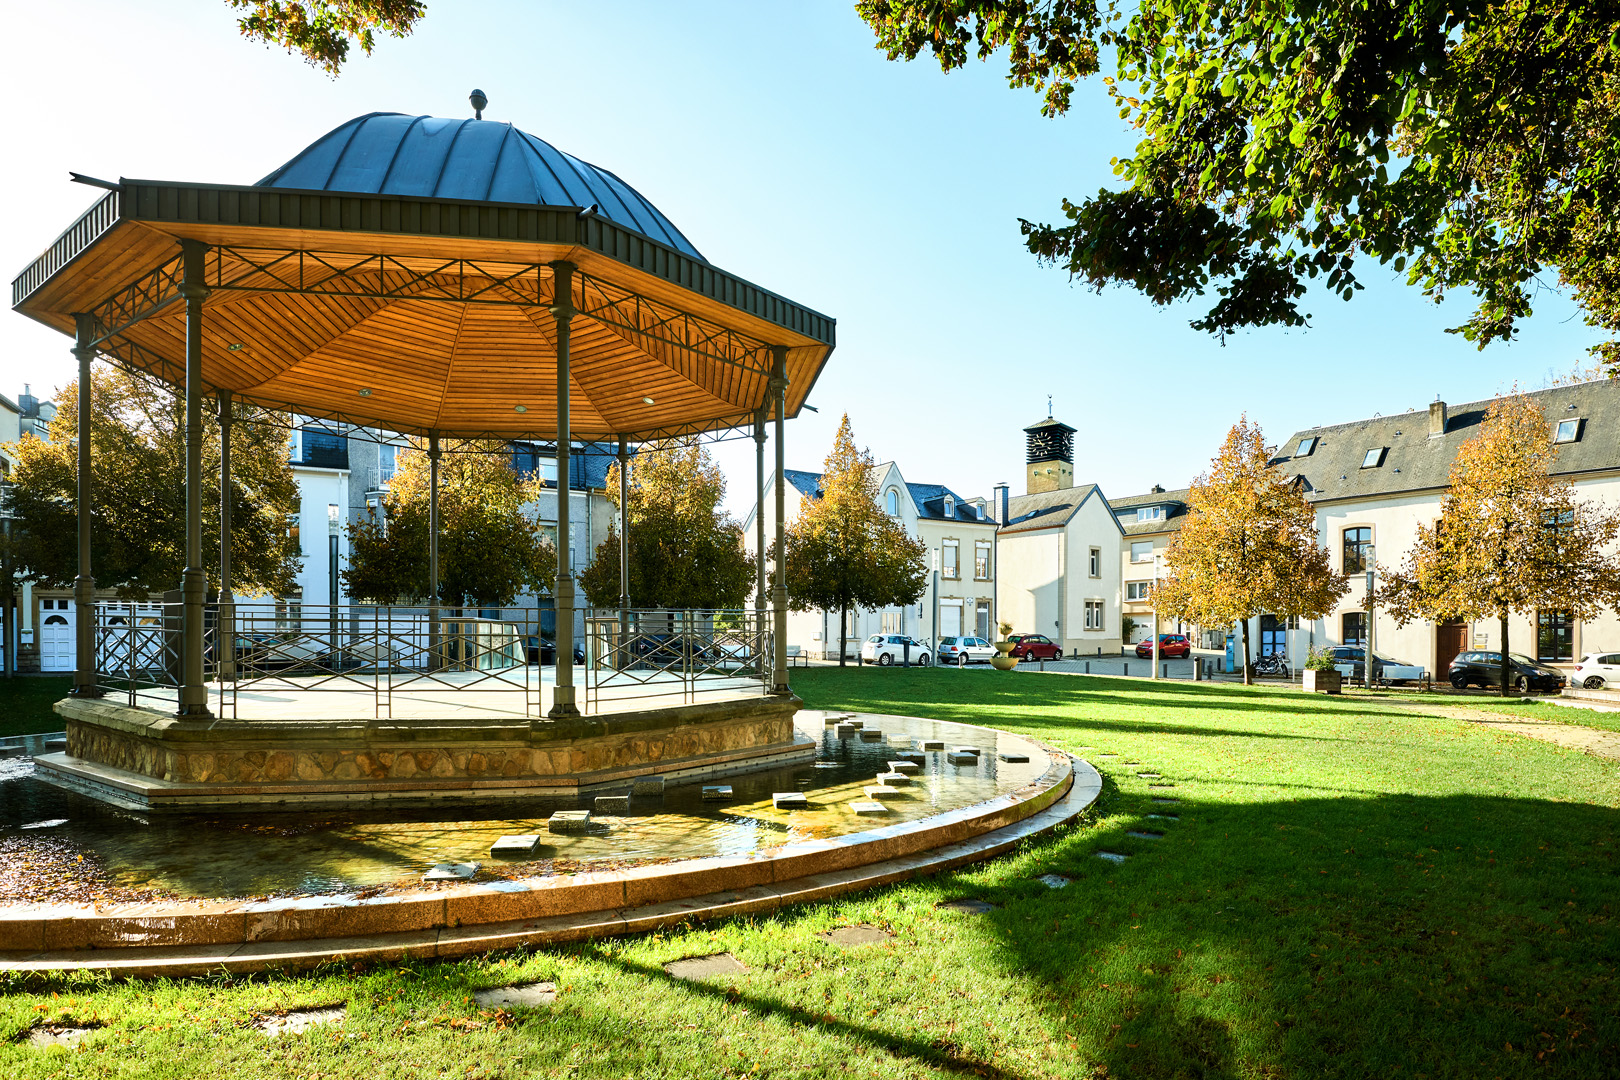 7 cultural highlights in Bonnevoie